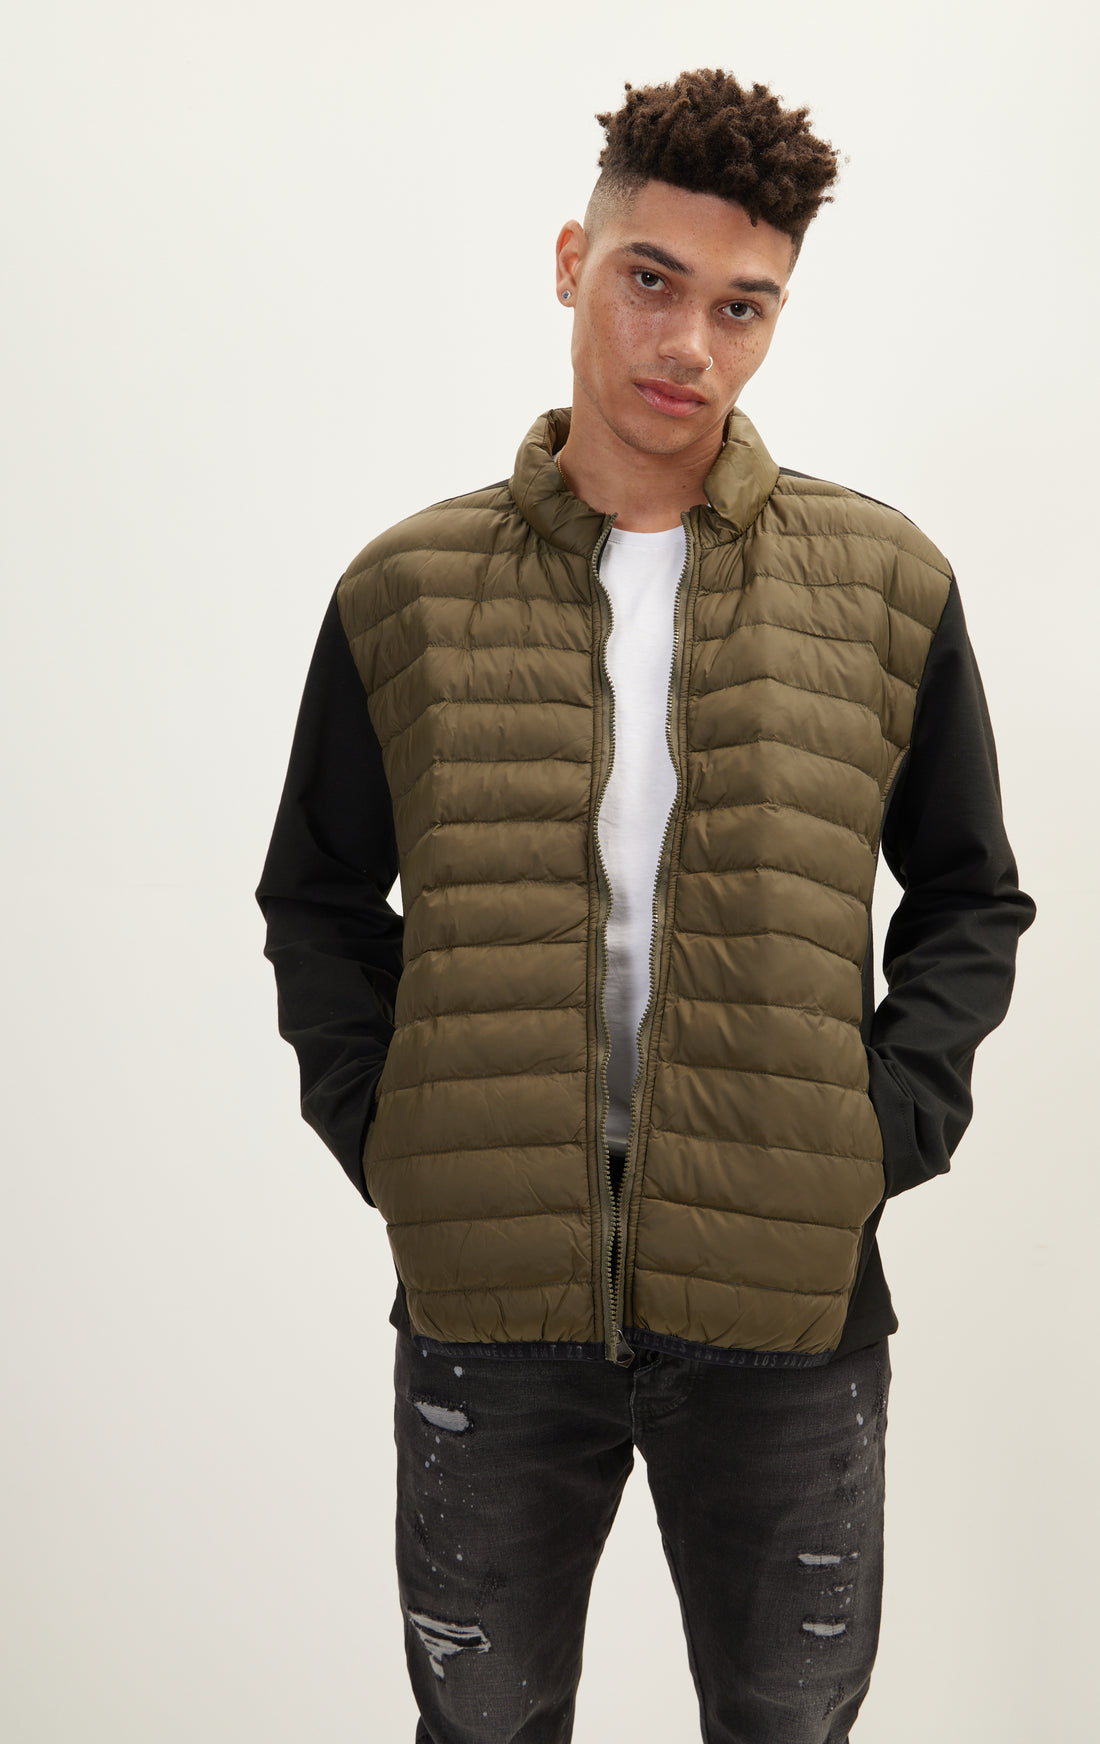 N° 71207 QUILTED PUFFER JACKET - BLACK/KHAKI